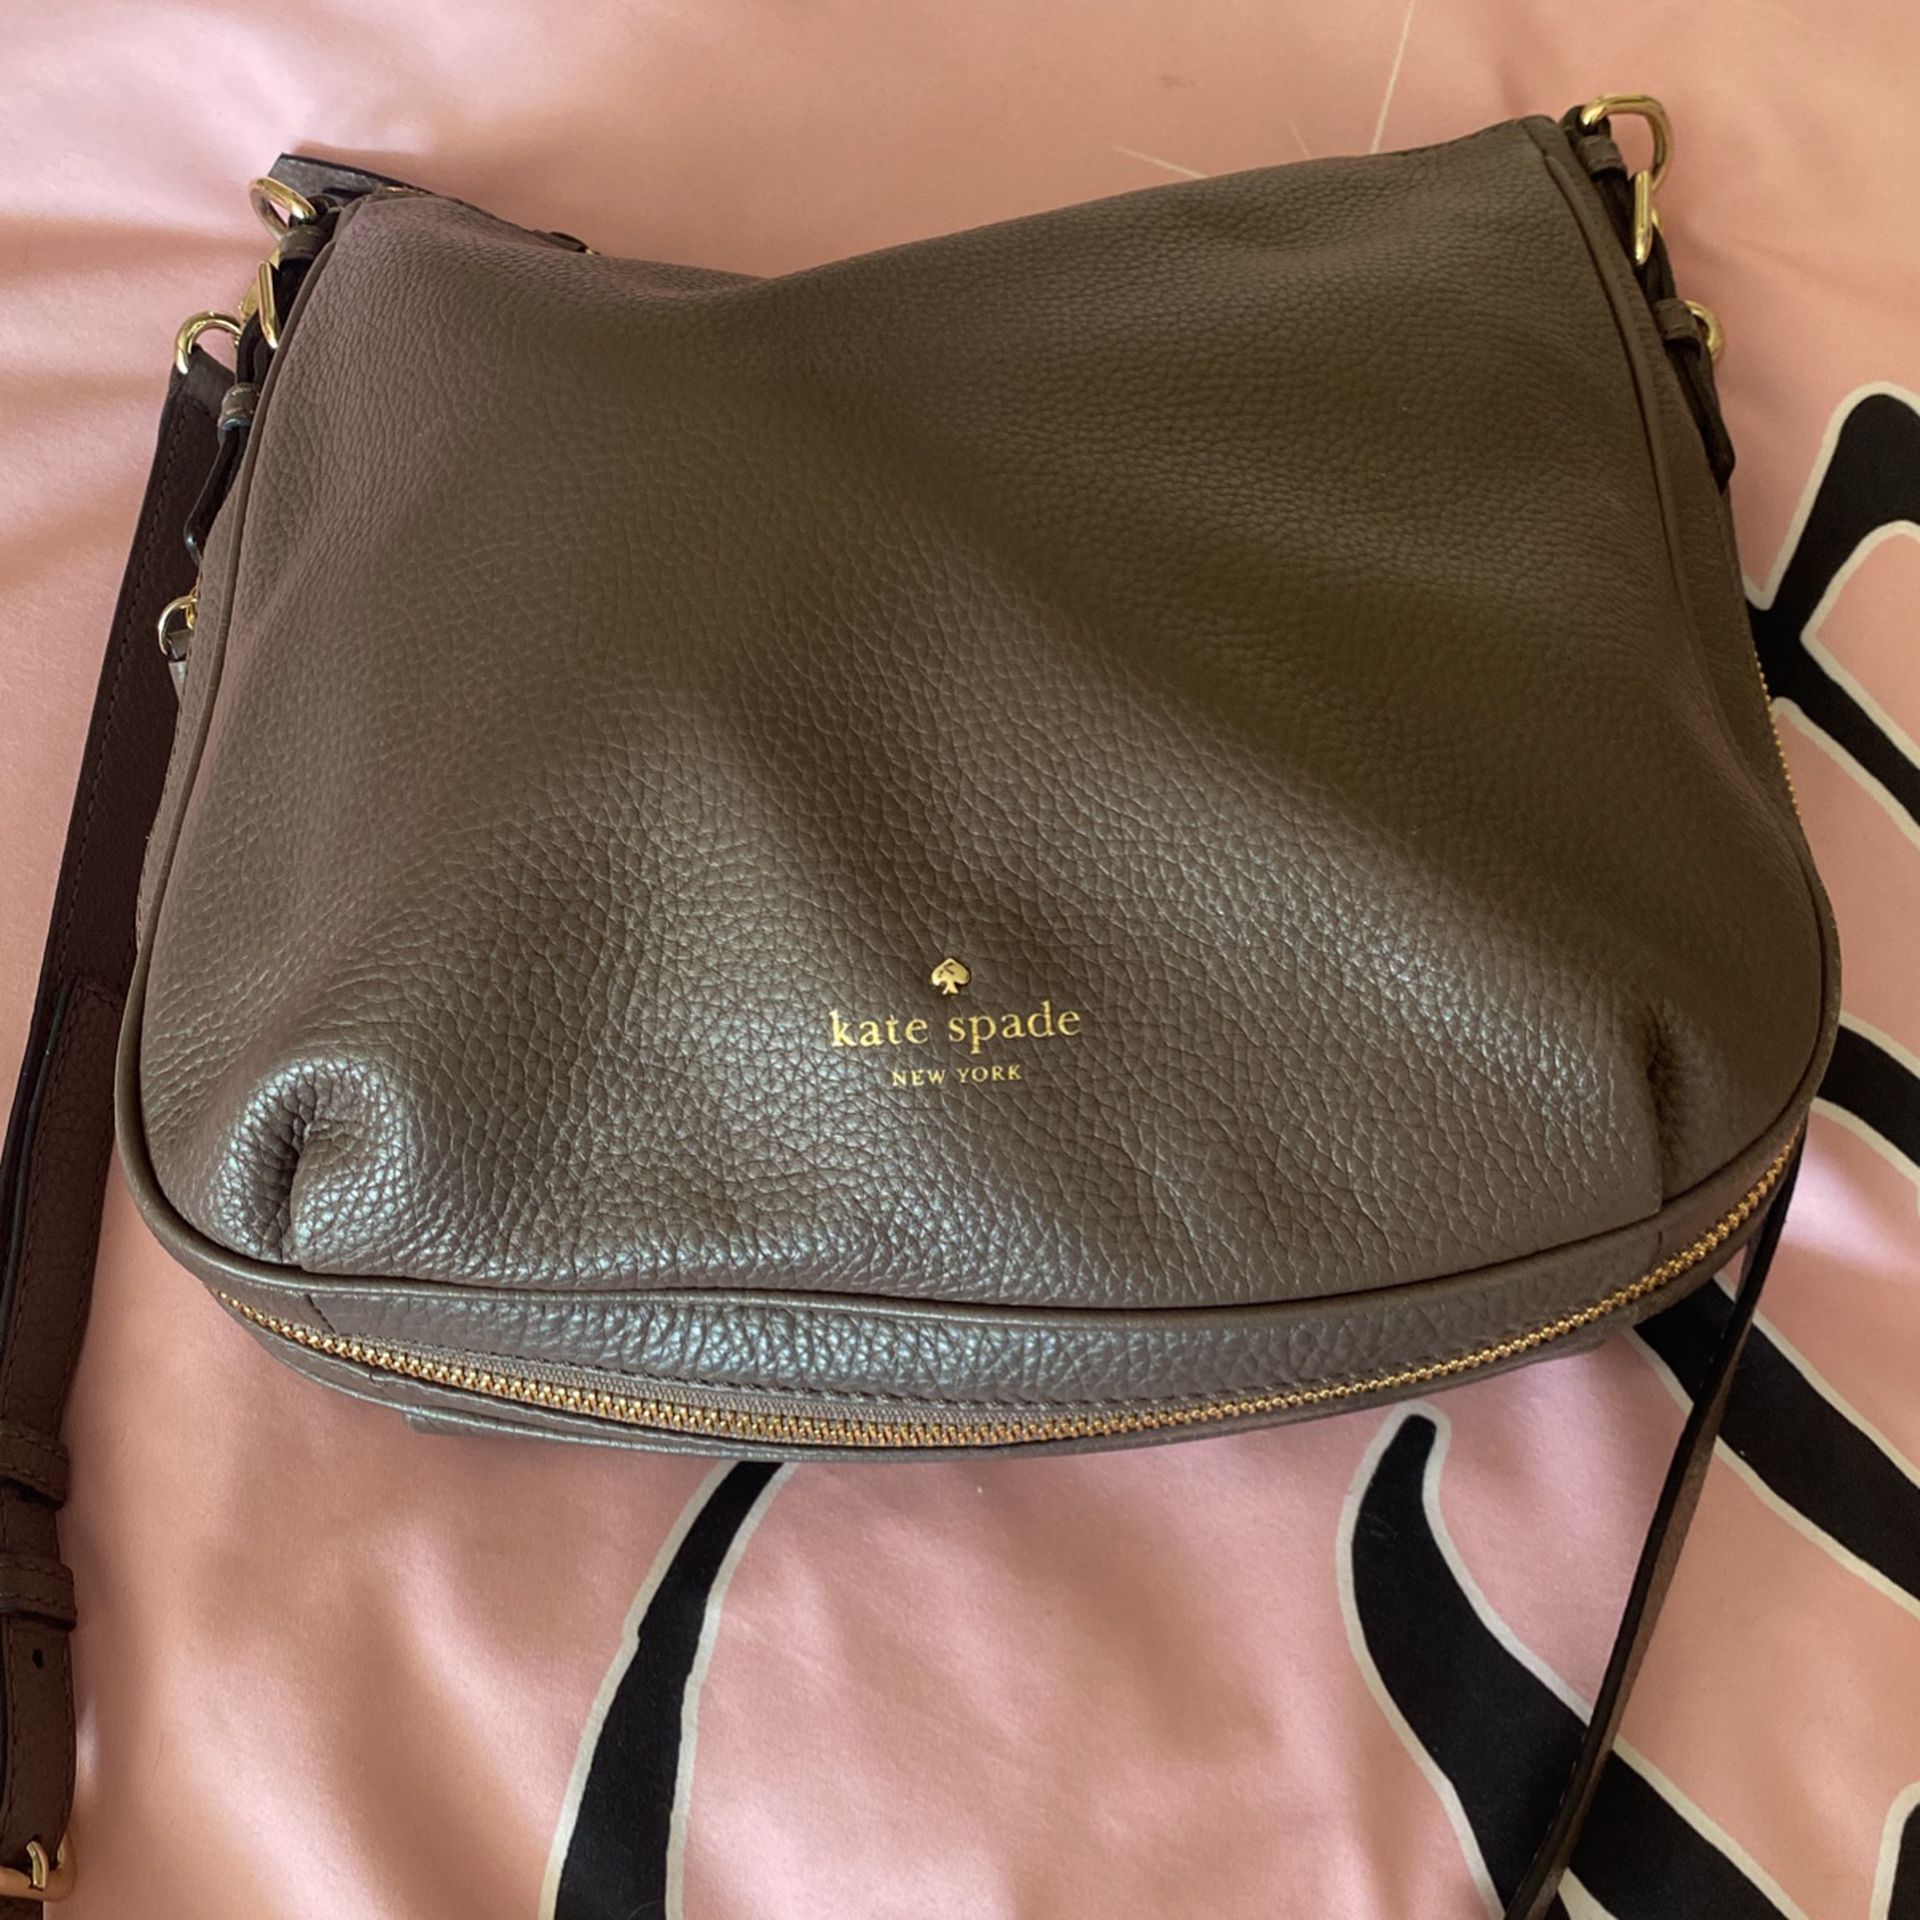 Authentic Kate Spade From New York Purse